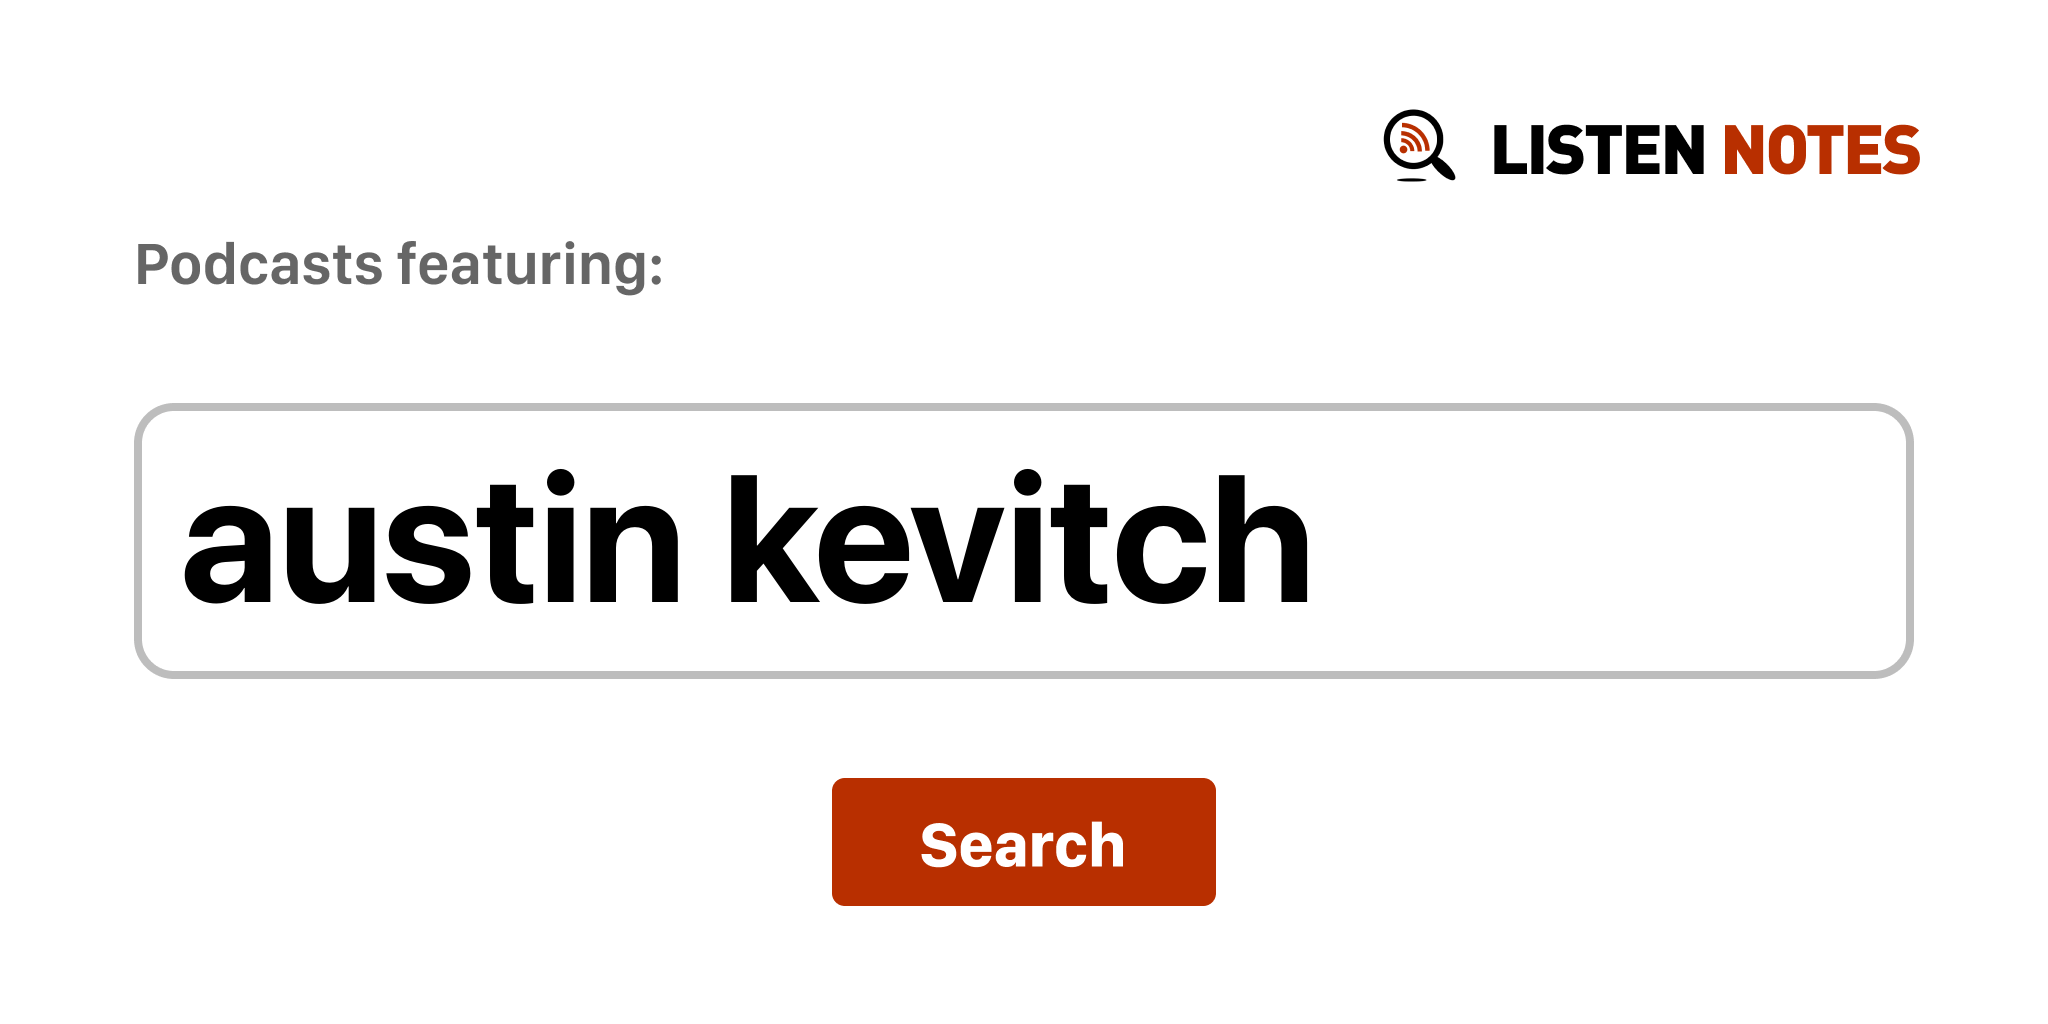 Who is Austin Kevitch?